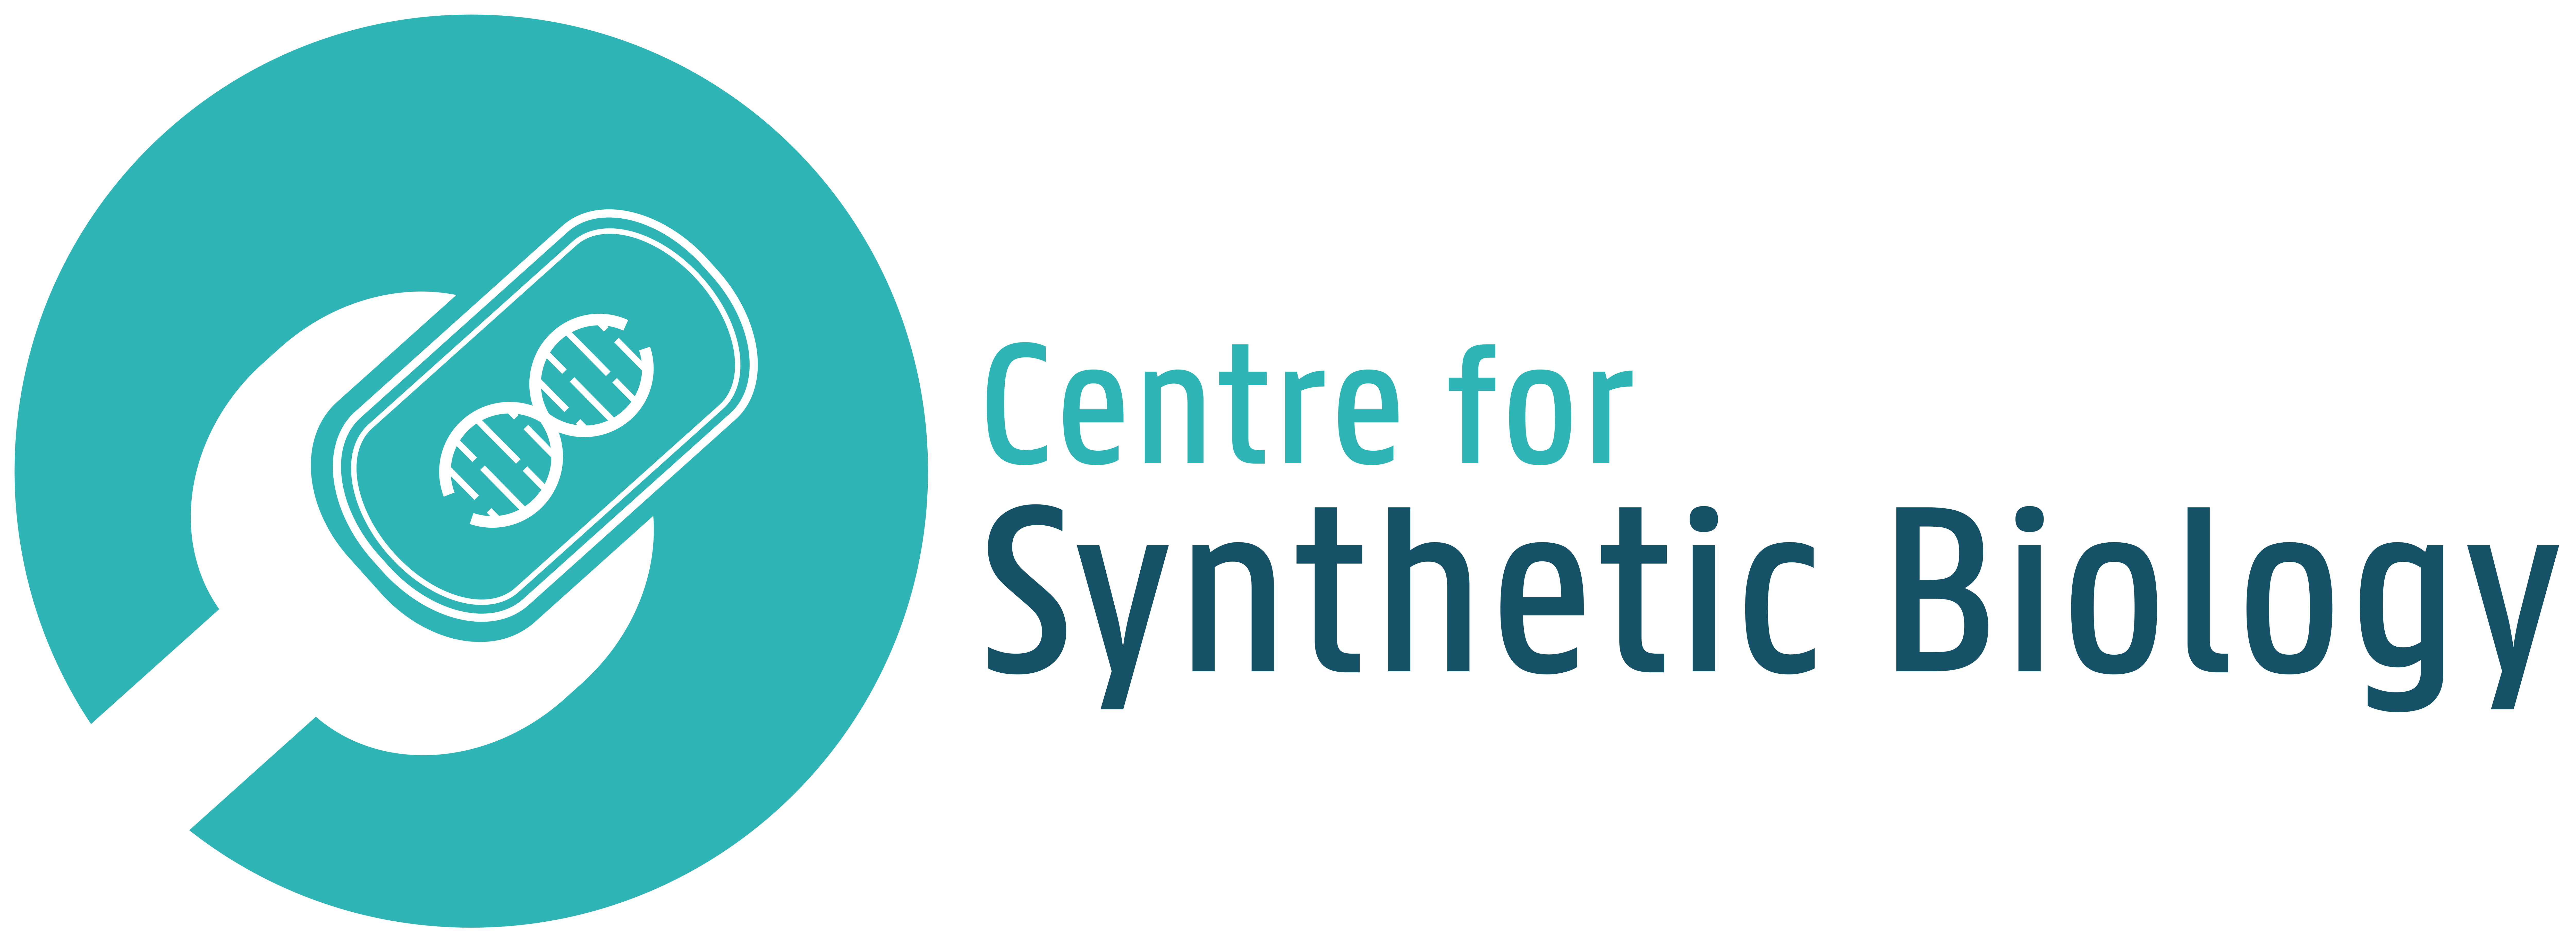 Center for Synthetic Biology logo